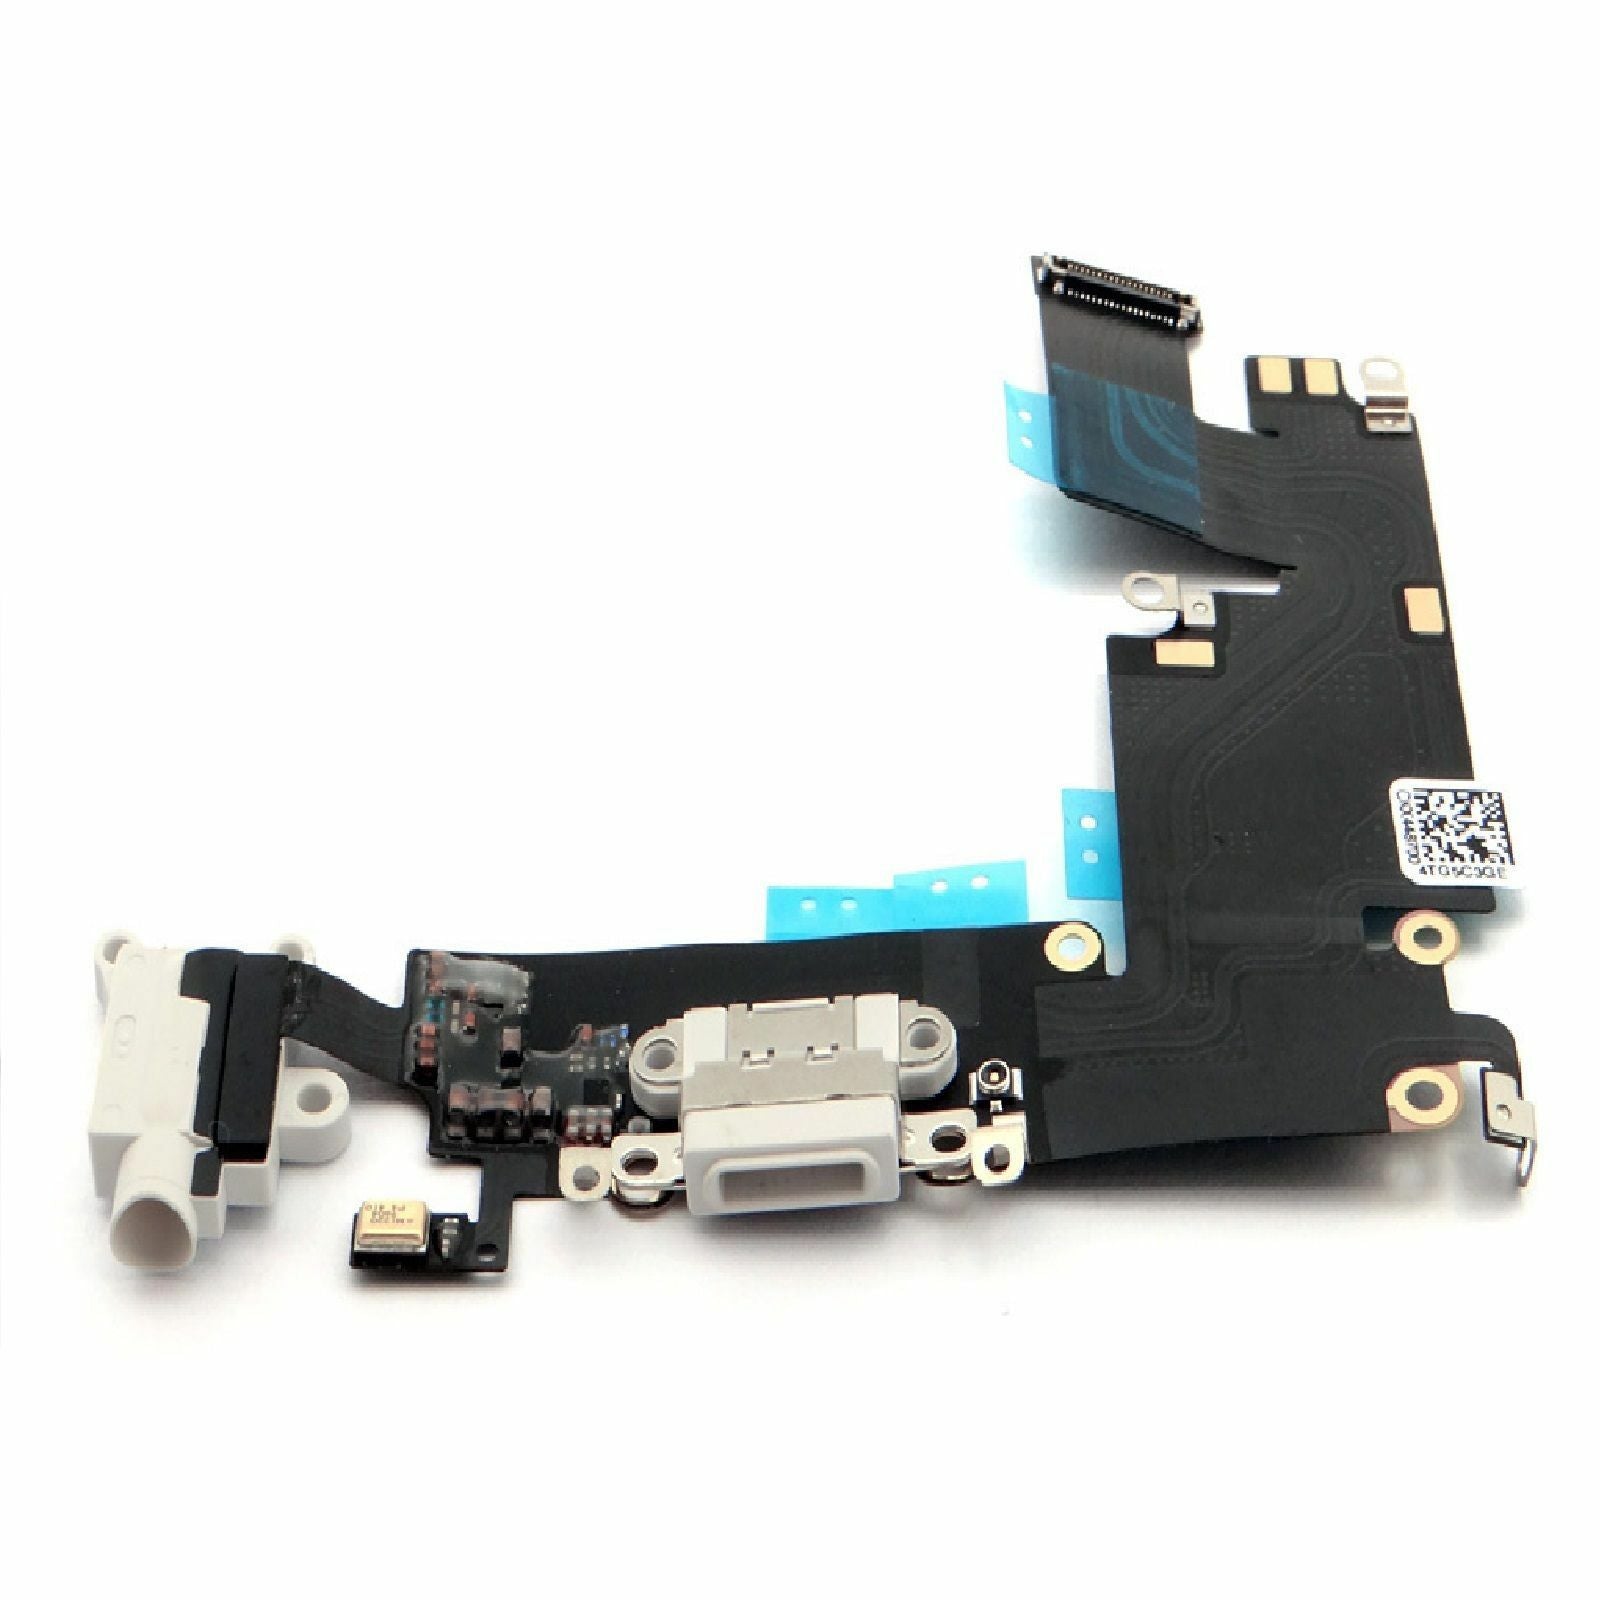 Apple iPhone 6 Plus Charging Port Flex Cable - White for [product_price] - First Help Tech